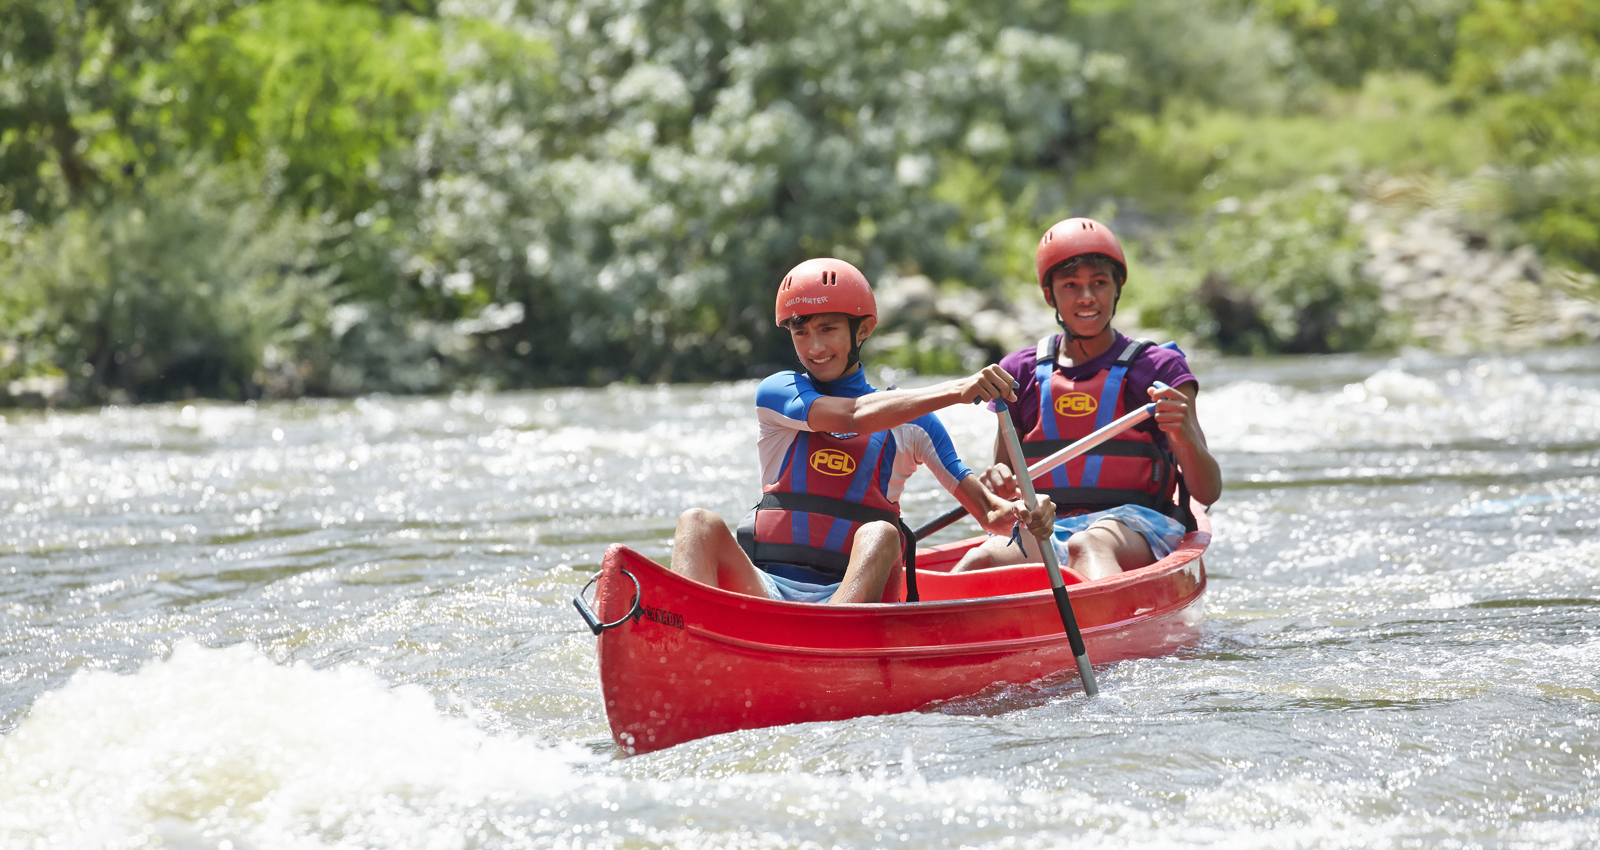 PGL Adventure Holidays - Specialist Holidays and Summer Camps for 7-17 year olds - France and Austria - Overseas Adventure - Two Centre Adventure, Paris & Disneyland®, Mediterranean Watersports, Skiing and Snowboarding